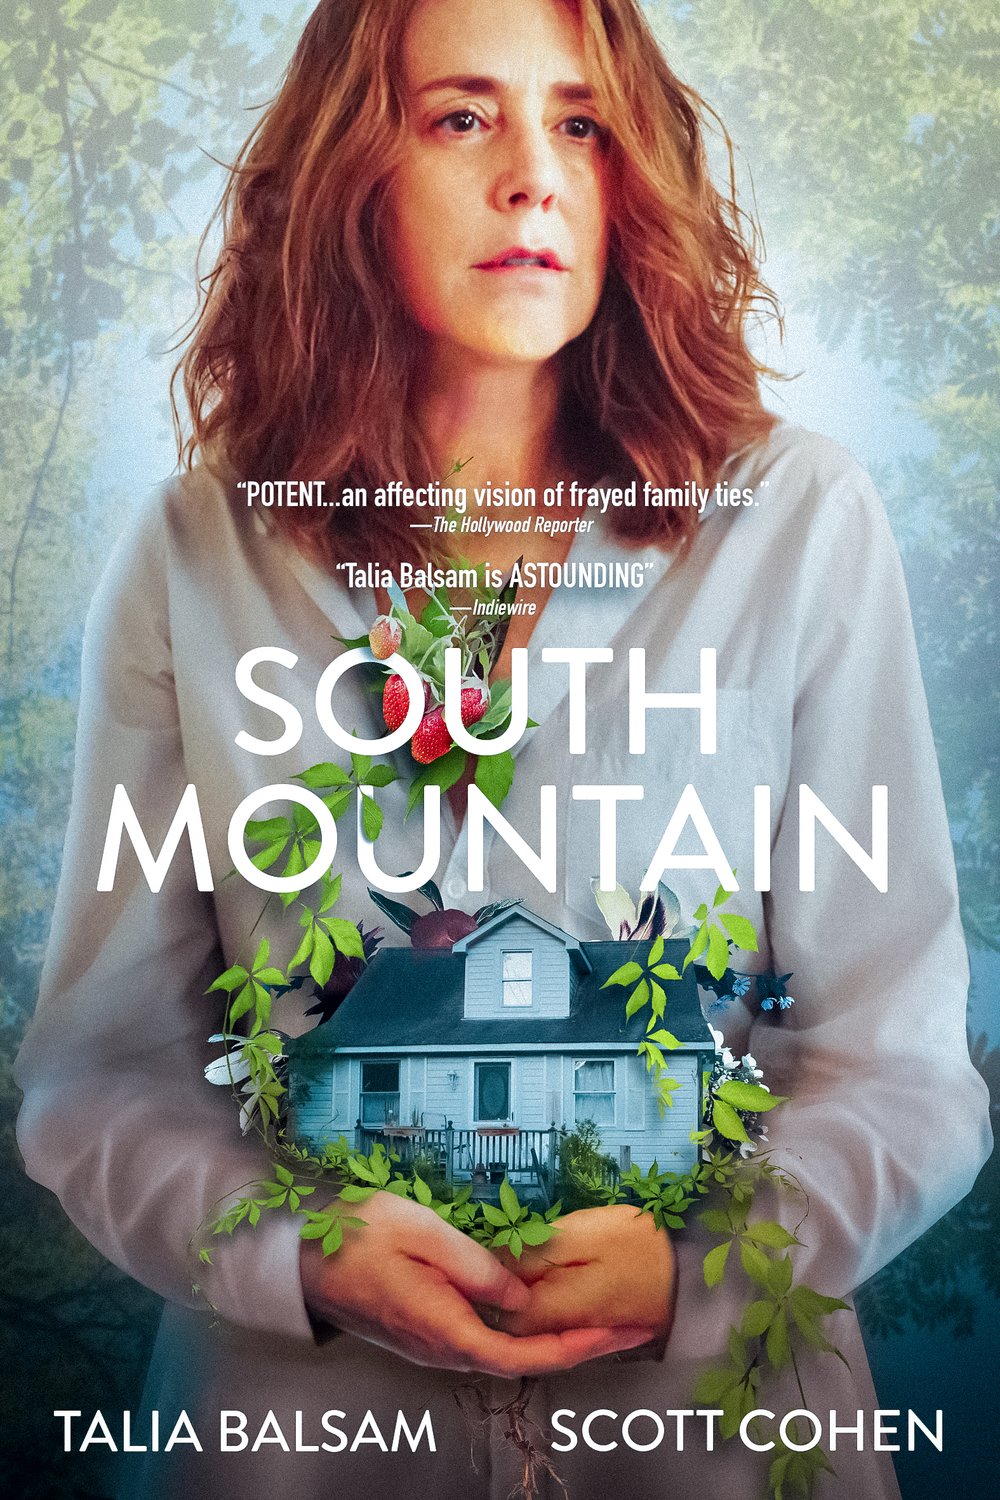 Poster of the movie South Mountain